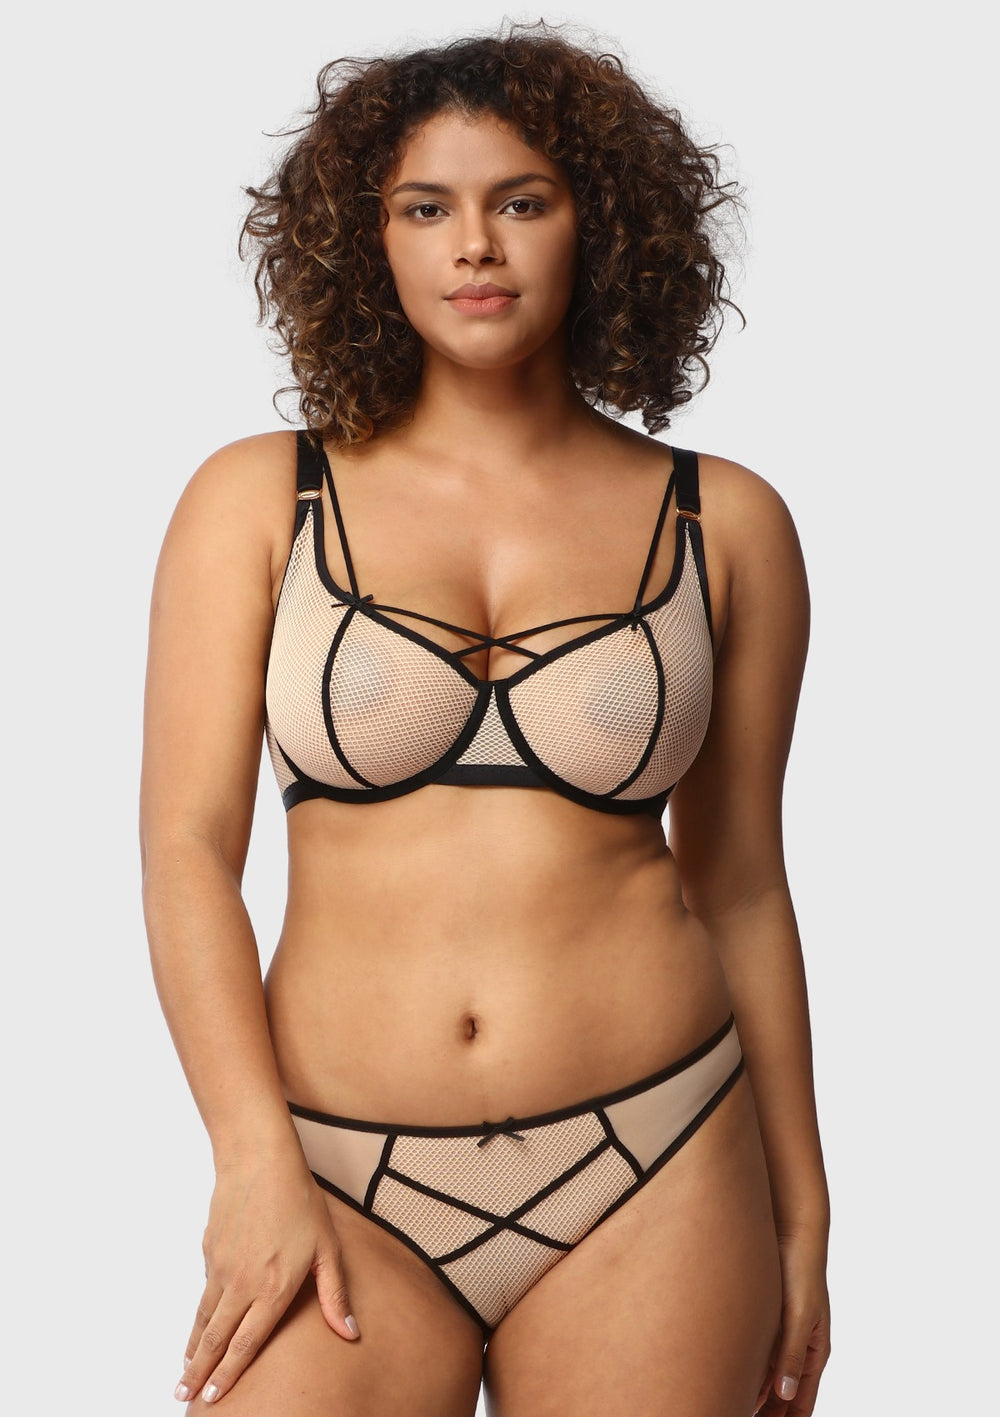 HSIA Billie Cross Front Strap Soft Sheer Mesh Unlined Bra and Panty Set